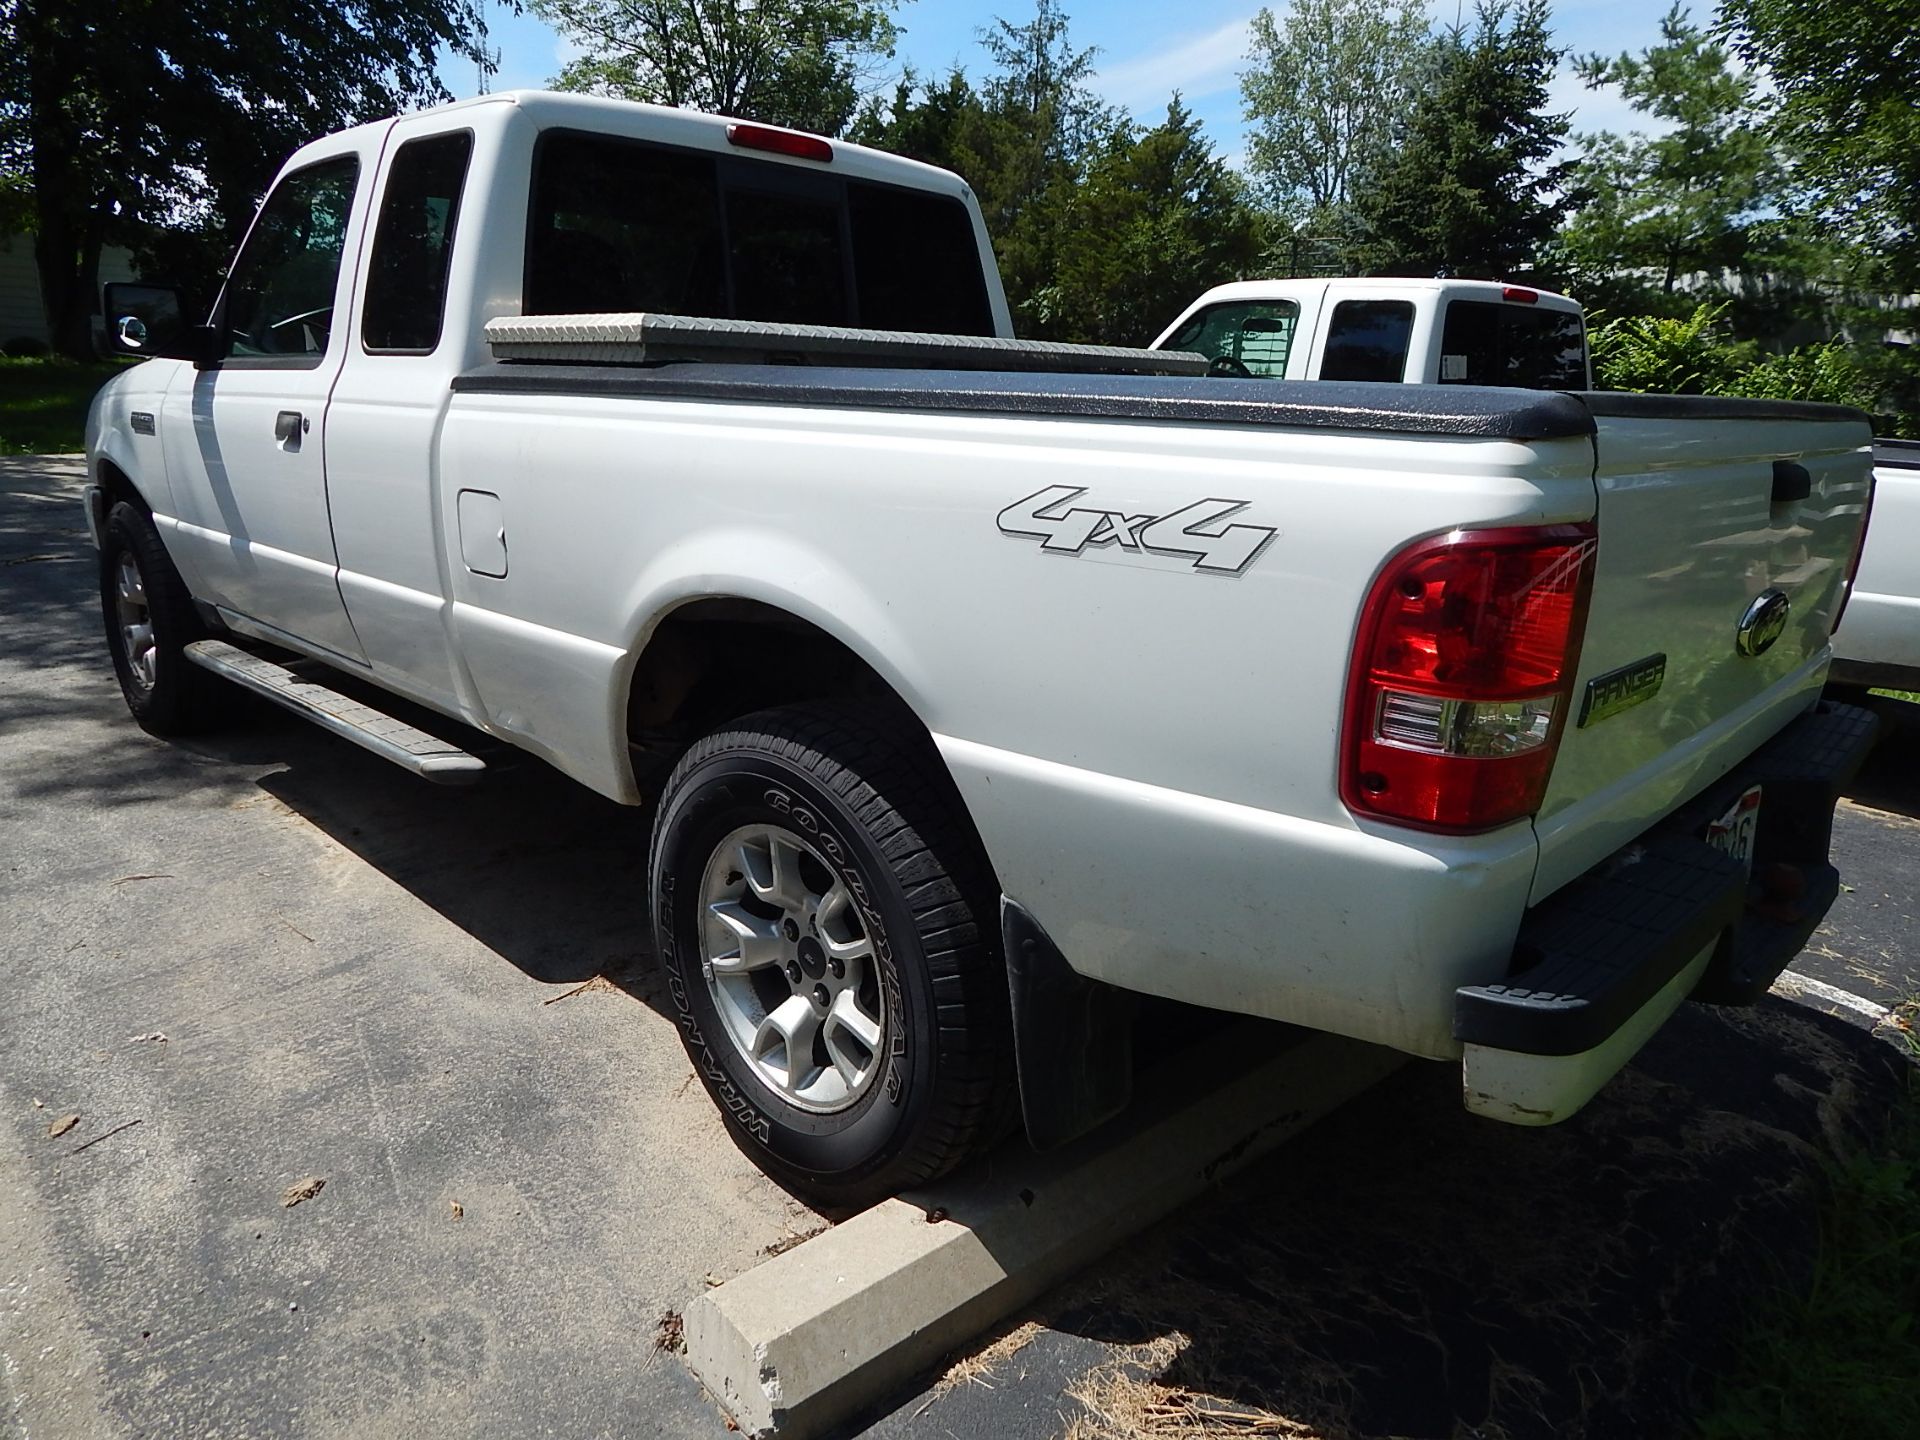 2006 Ford Ranger XLT Pick-Up, VIN 1FTZR15E57PAO1346, Extended Cab, 4WD Automatic, PW, PL, A/C, Am/ - Image 6 of 19